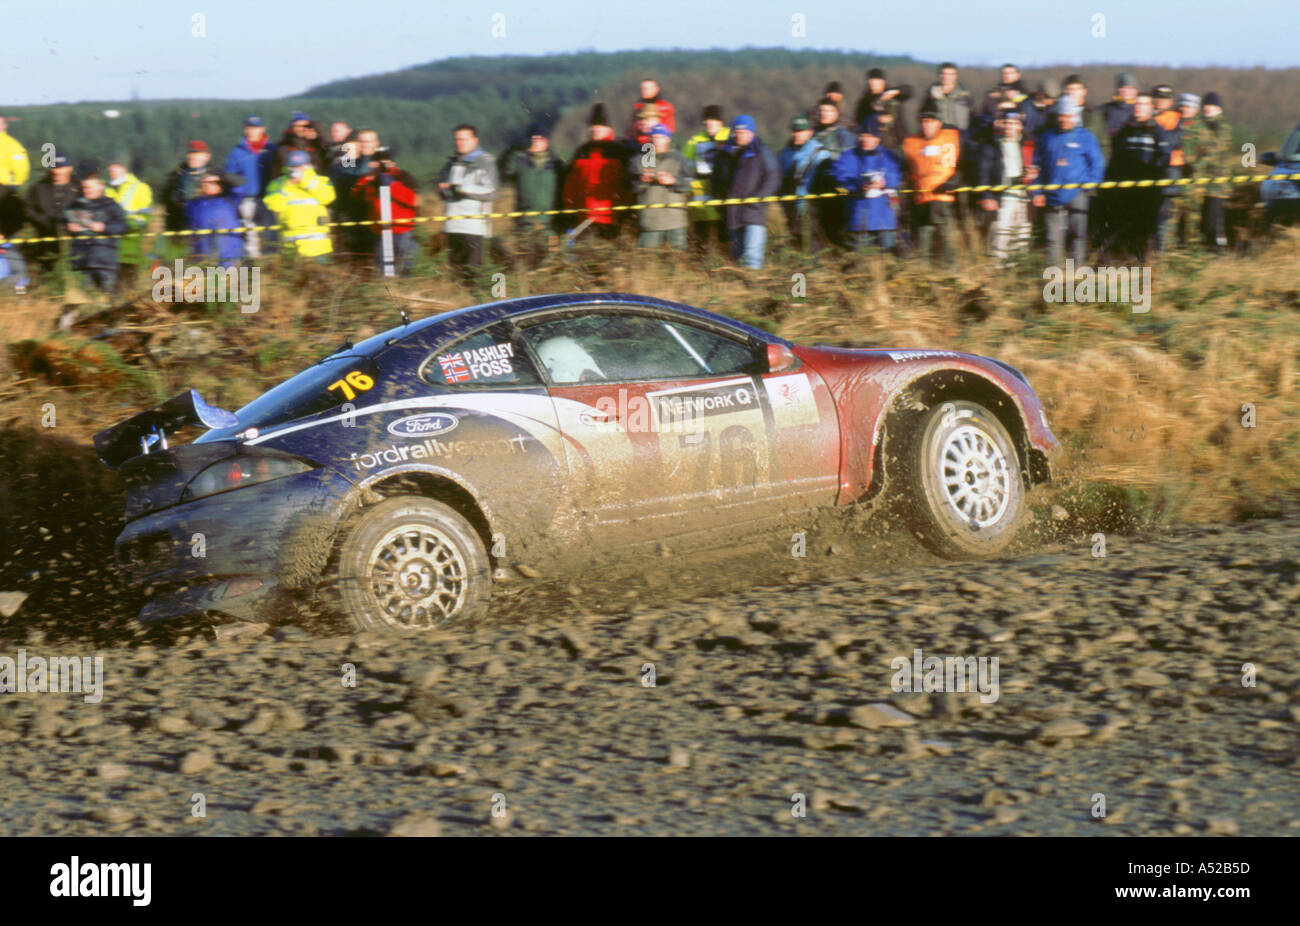 2002 Ford Puma driven by A Foss on Network Q Rally Stock Photo - Alamy